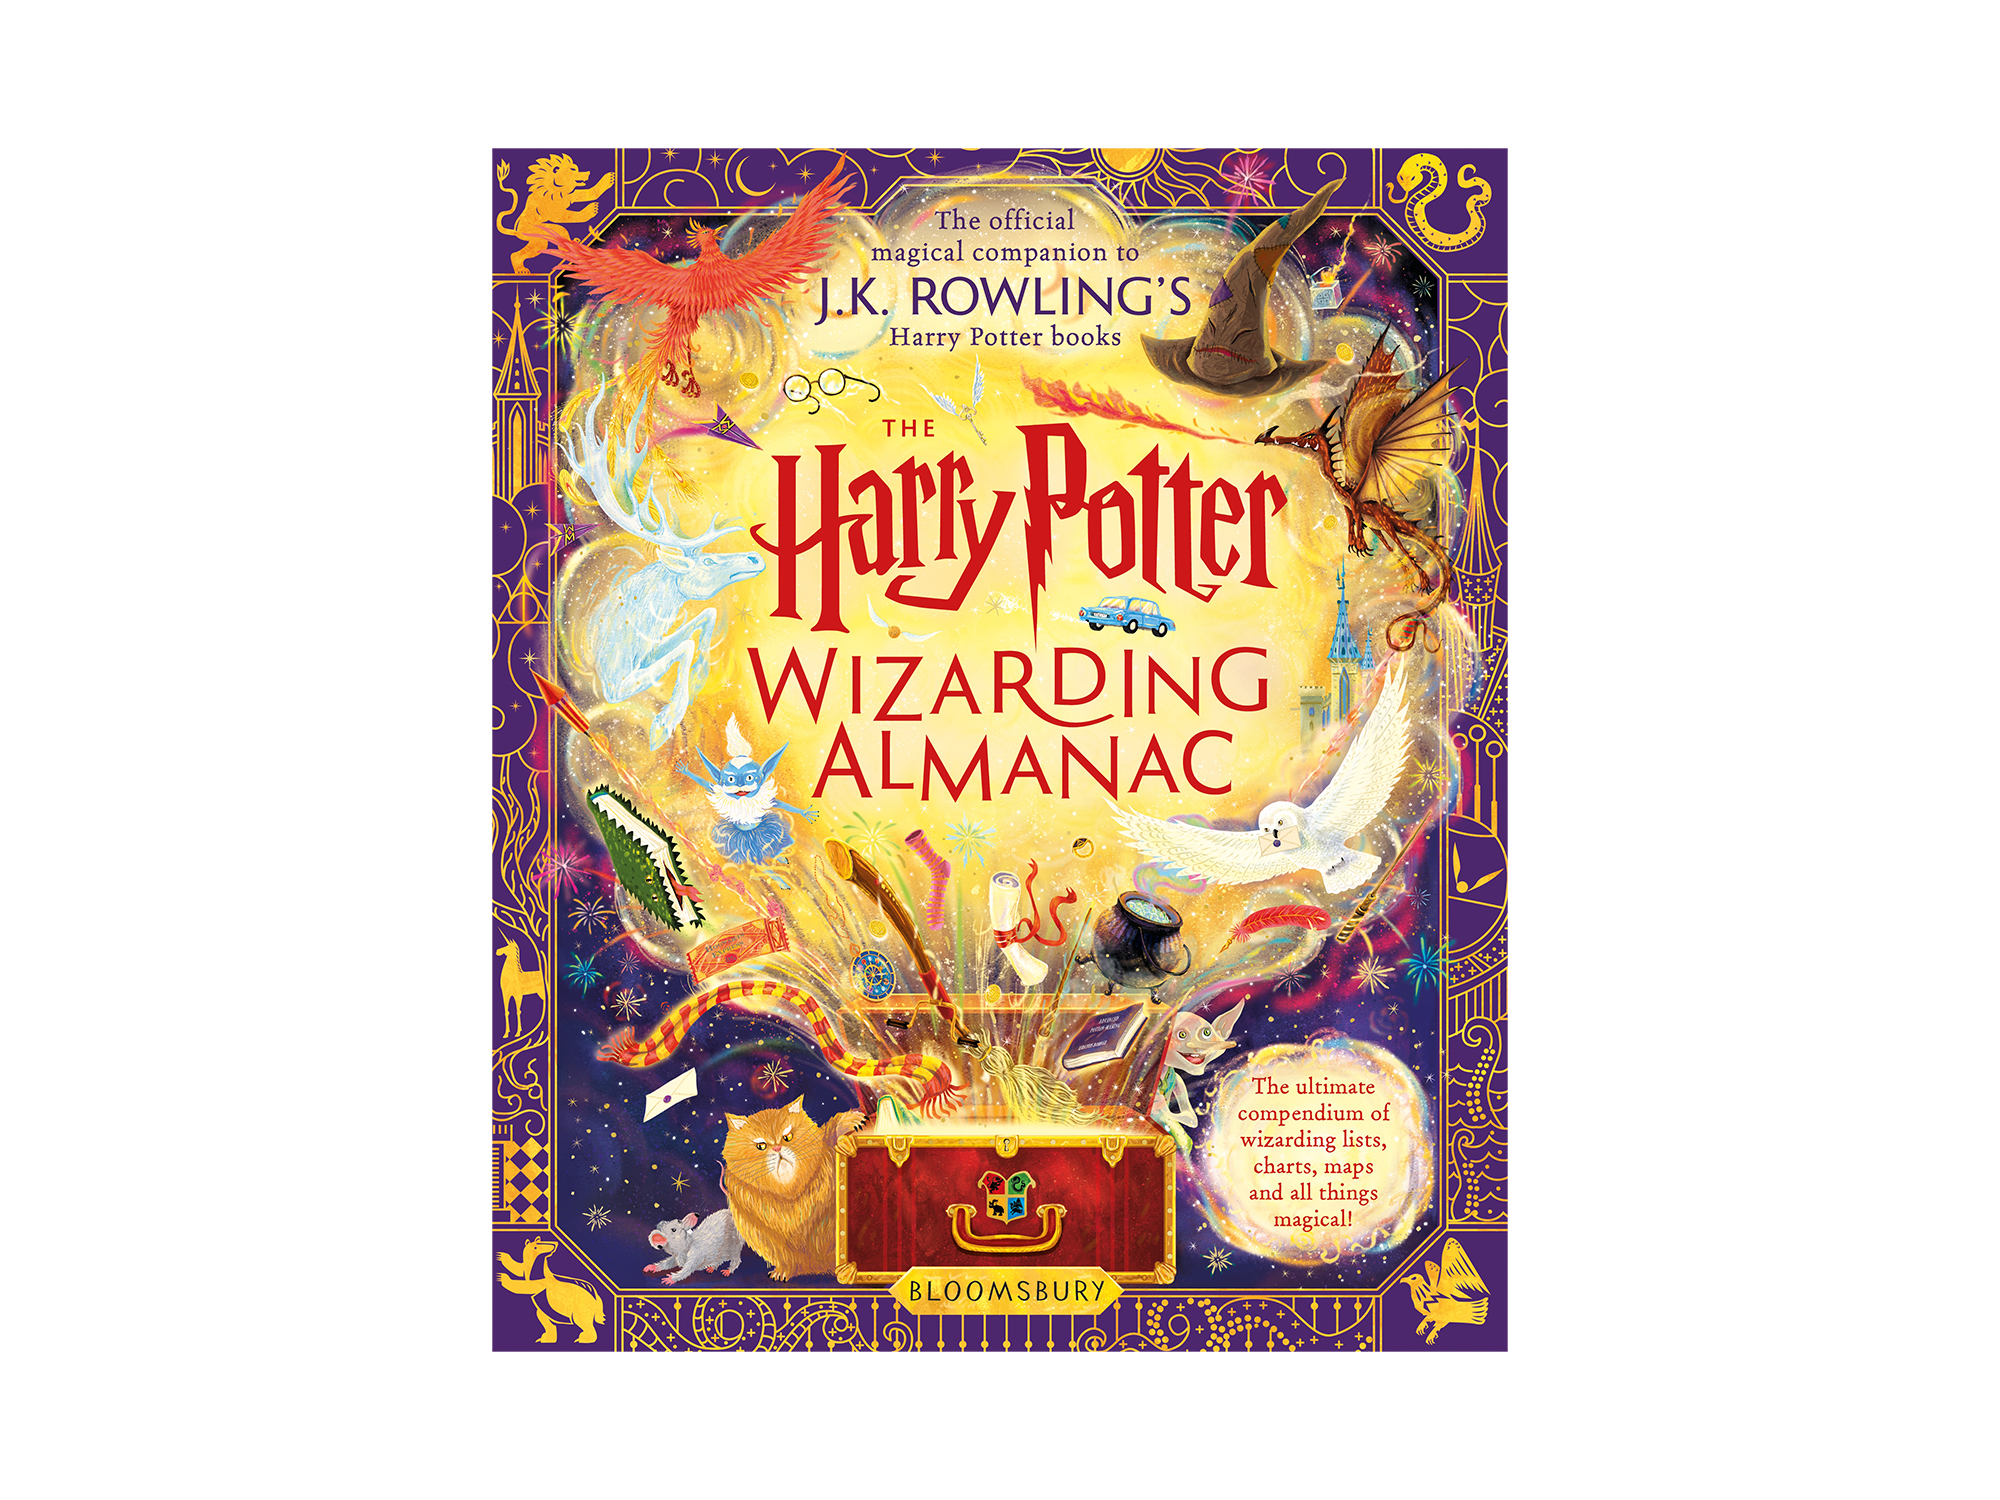 An exclusive interview with Pham Quang Phuc, one of the illustrators of The Harry Potter Wizarding Almanac